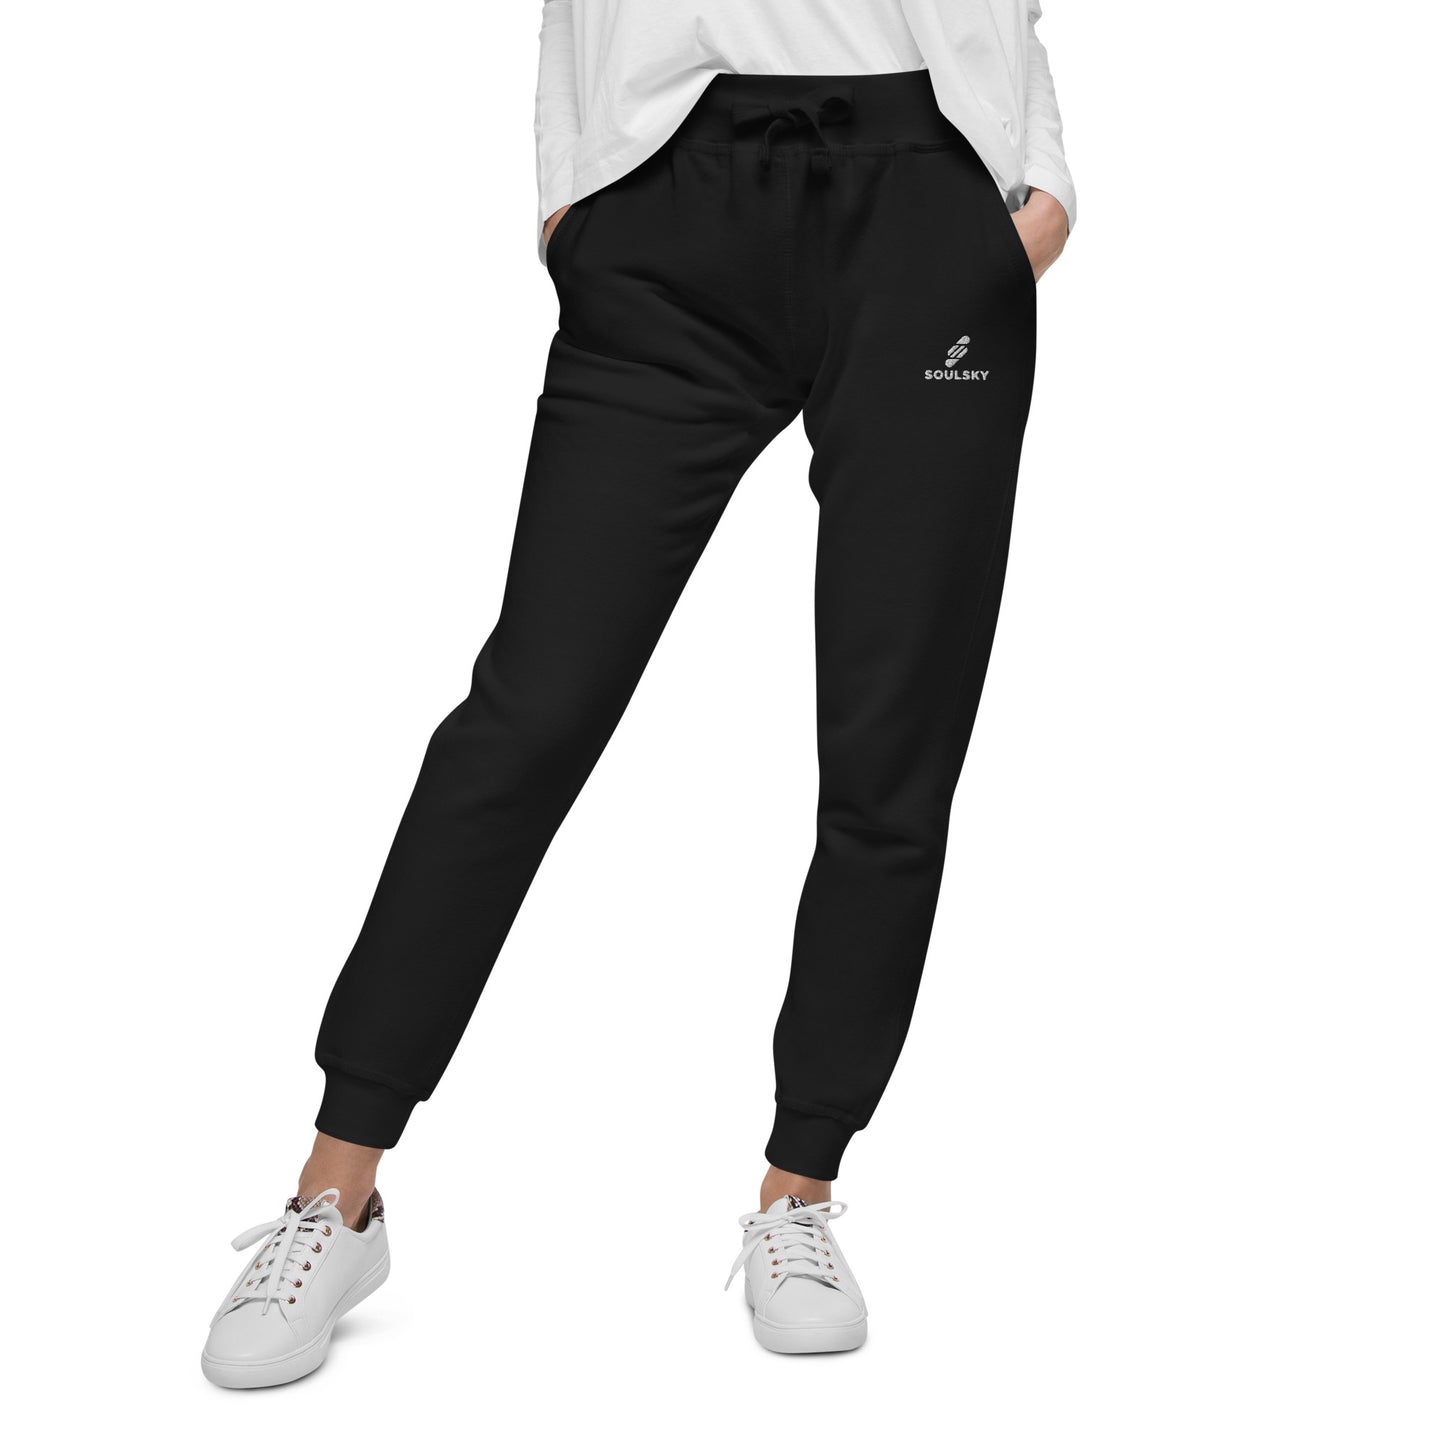 Female model wearing black unisex joggers with white embroidered logo on left thigh that says "SOULSKY".